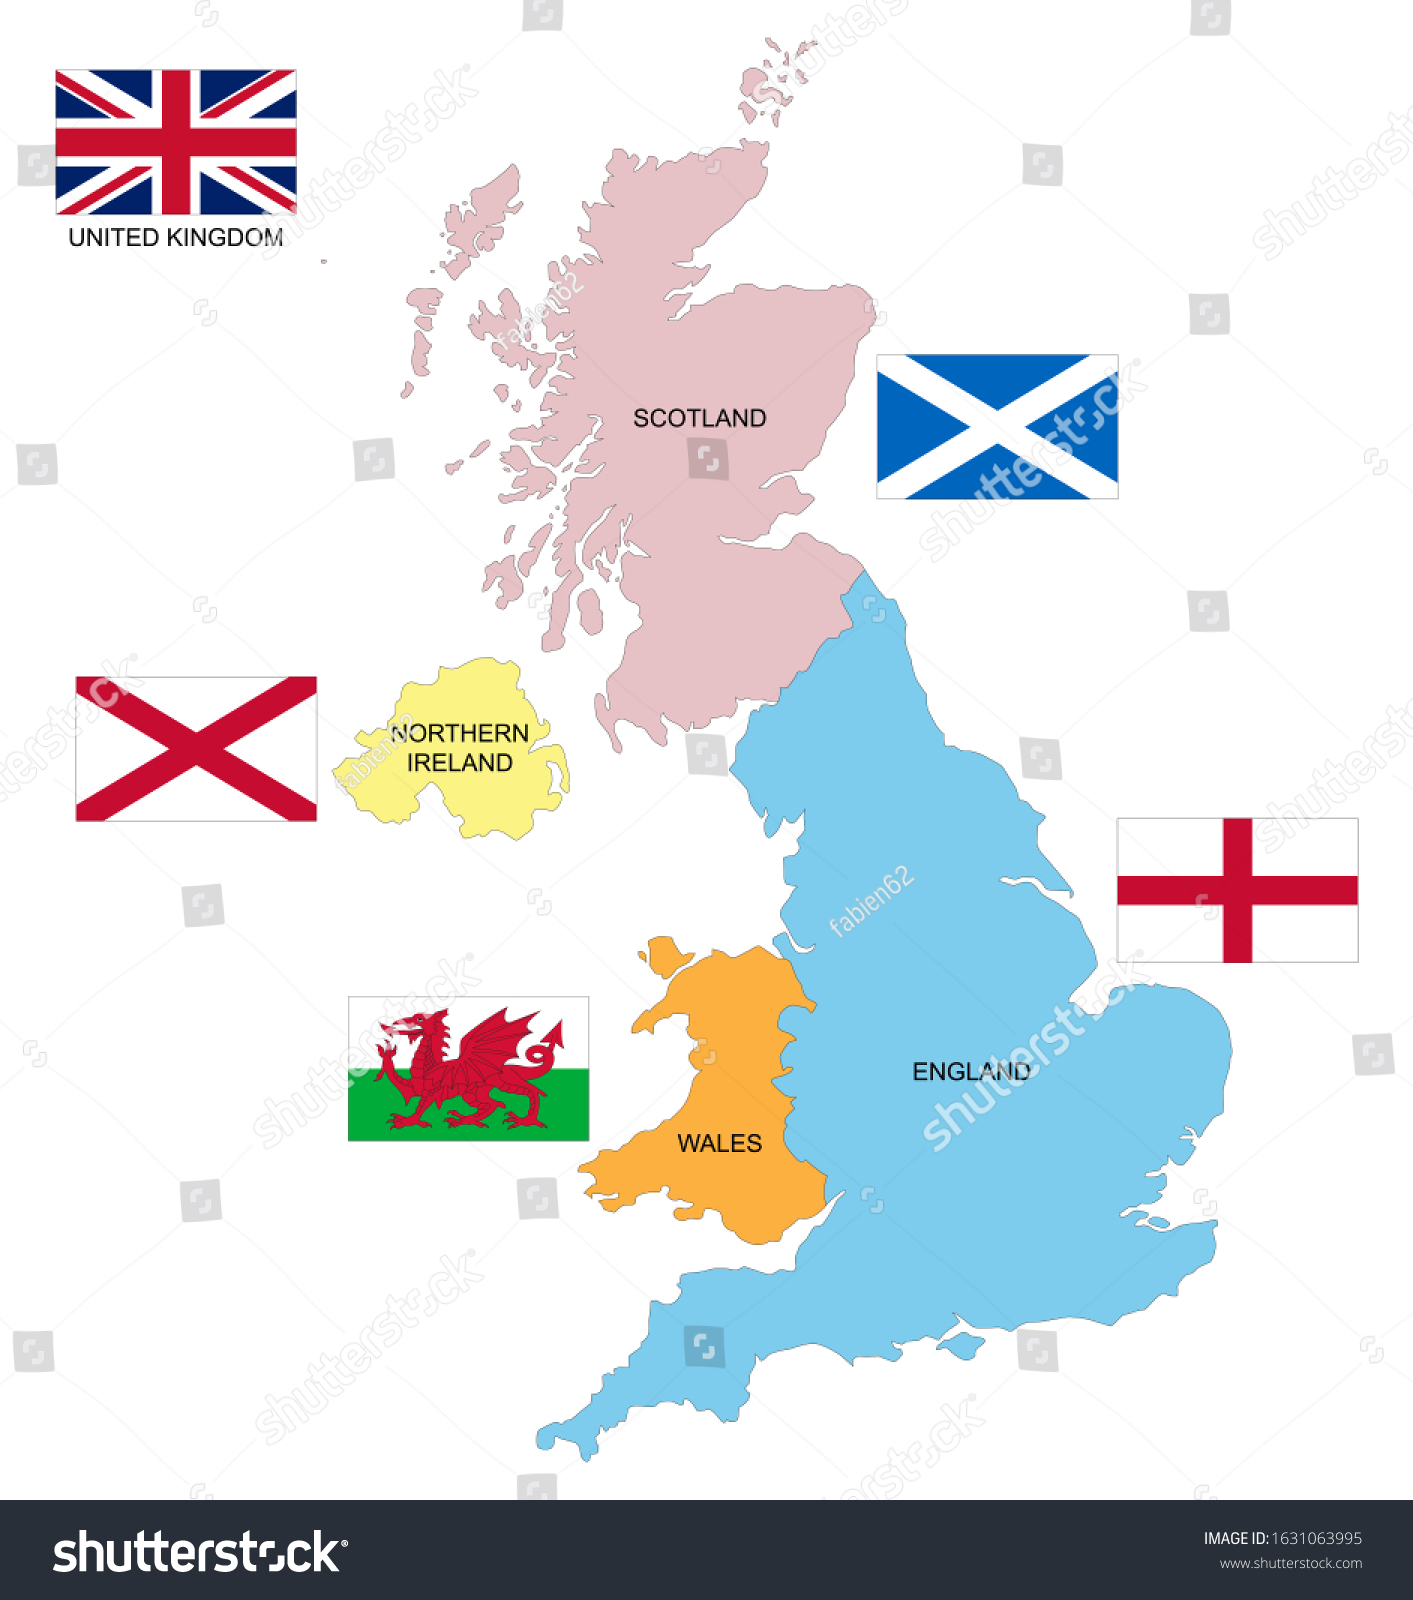 The United Kingdom Display Poster - UK Map Poster